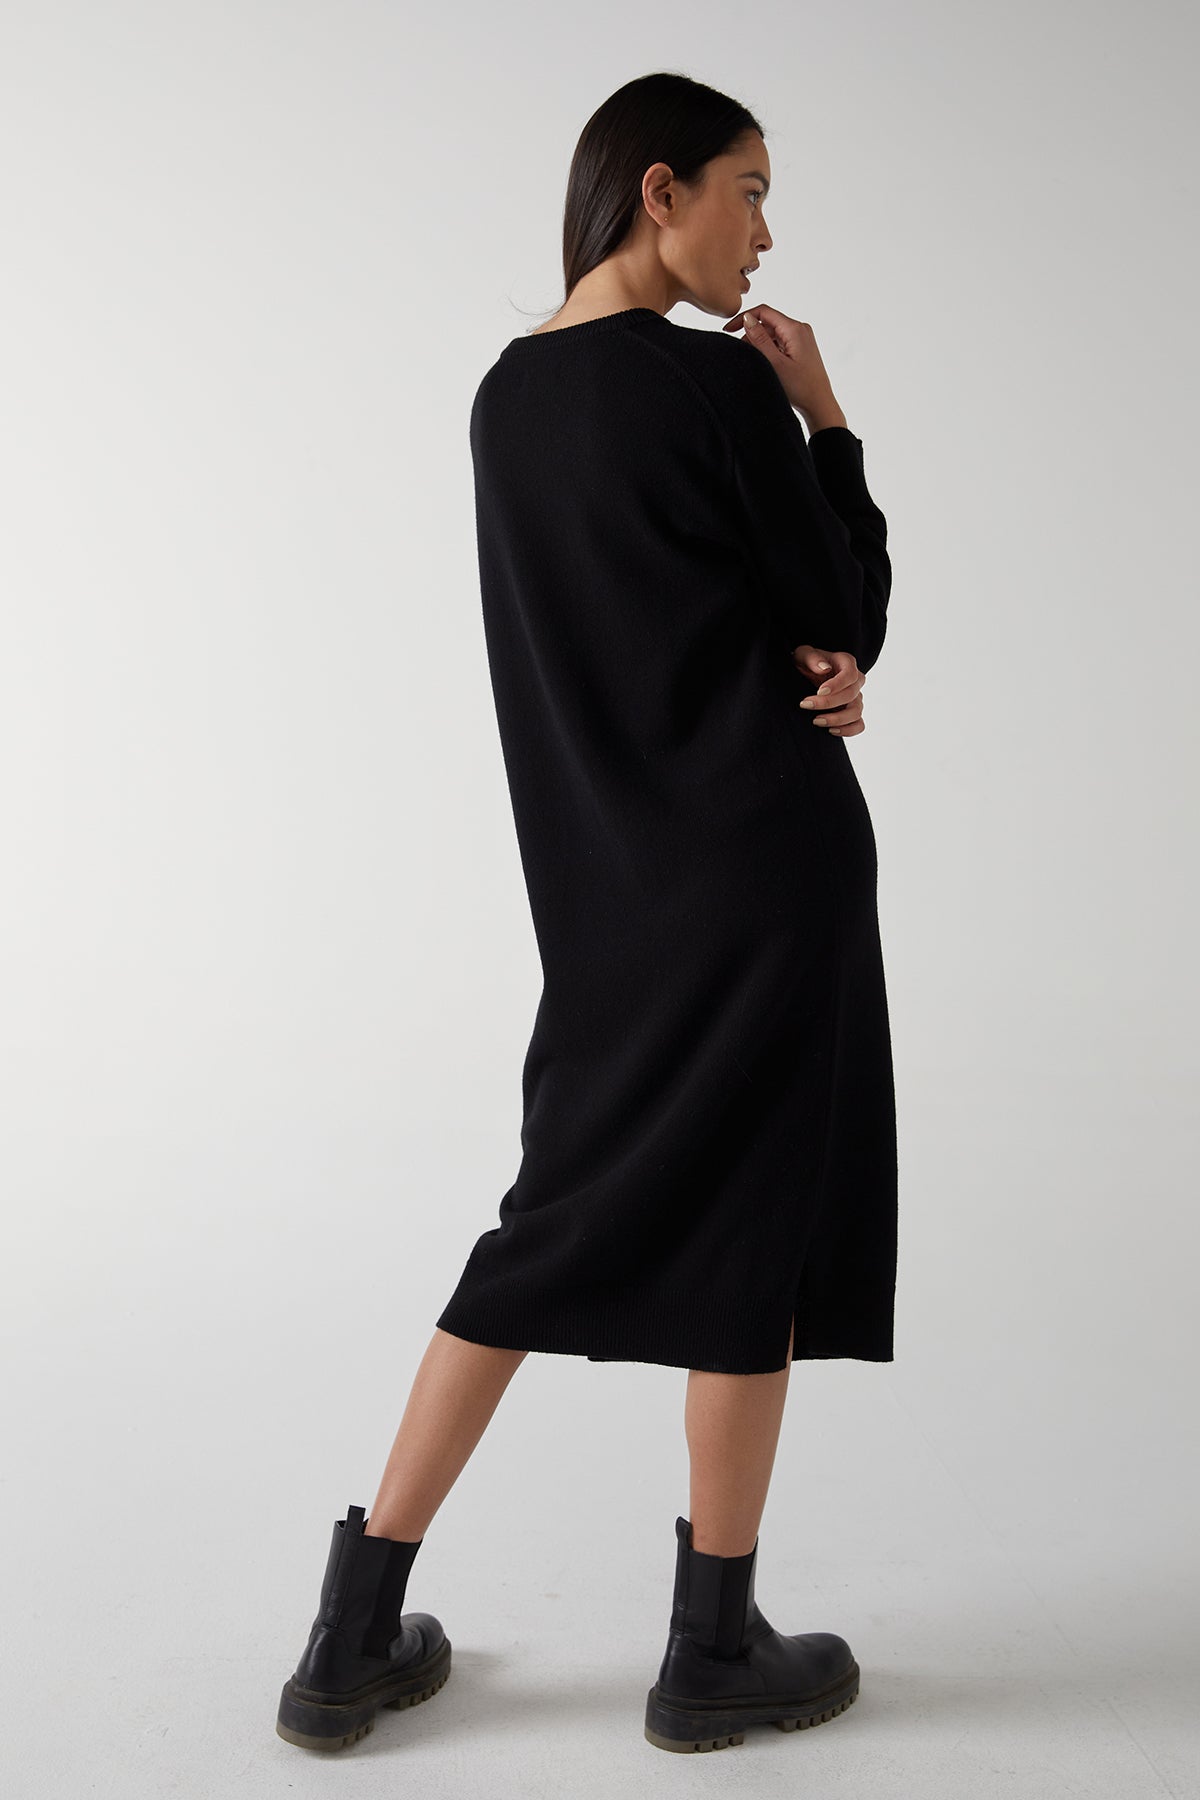 A woman showcasing the side hem slits of her LAUREL DRESS by Velvet by Jenny Graham, creating a minimal silhouette.-25315829547201